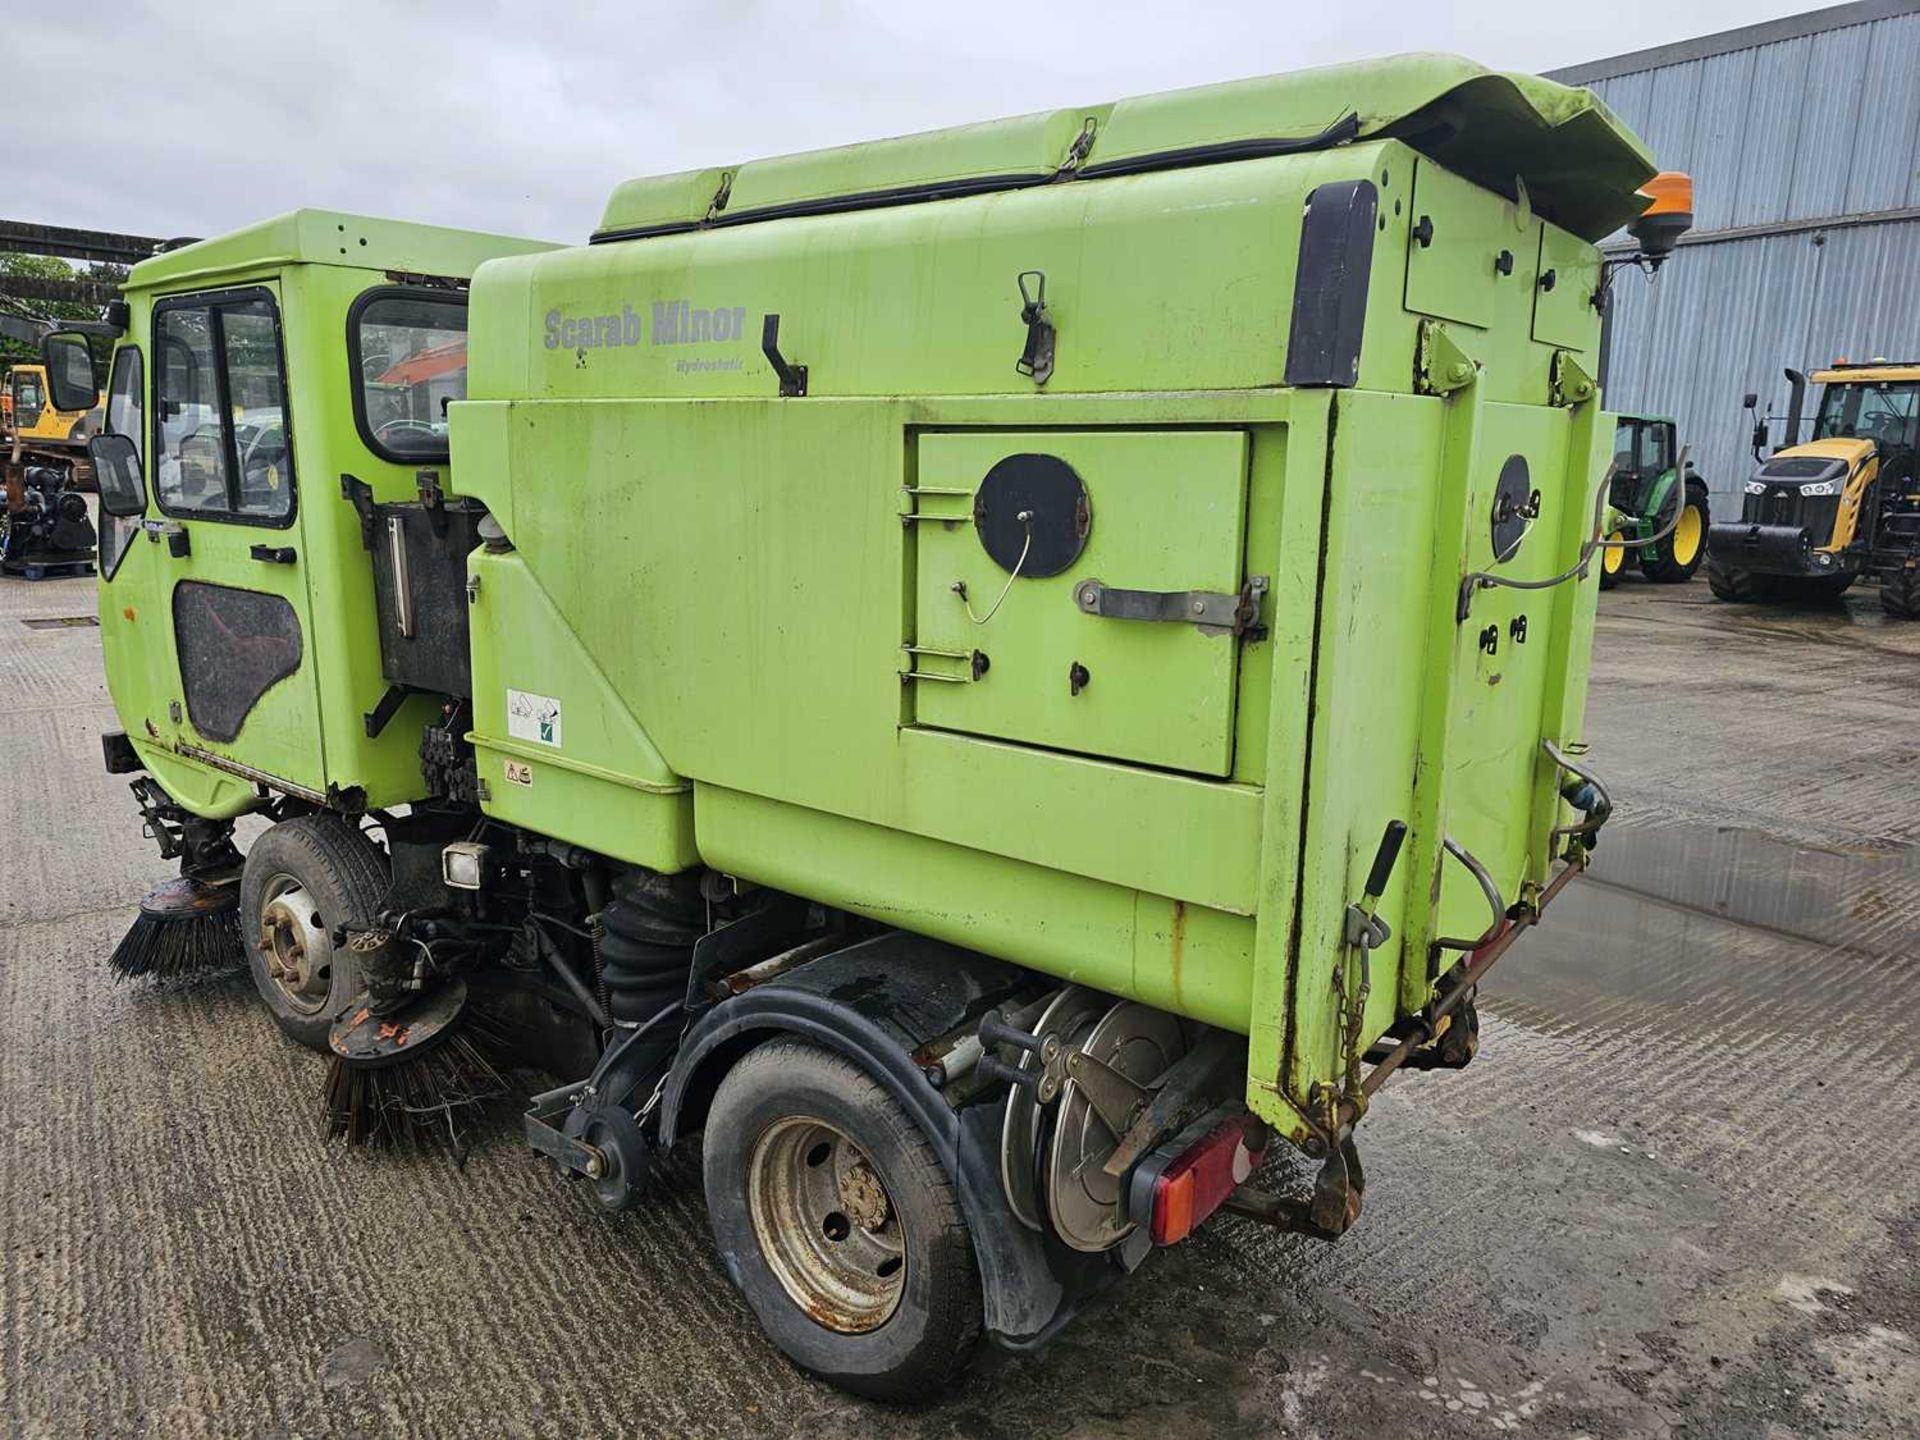 Scarab Minor 188A101T 4x2 Sweeper Lorry - Image 2 of 16